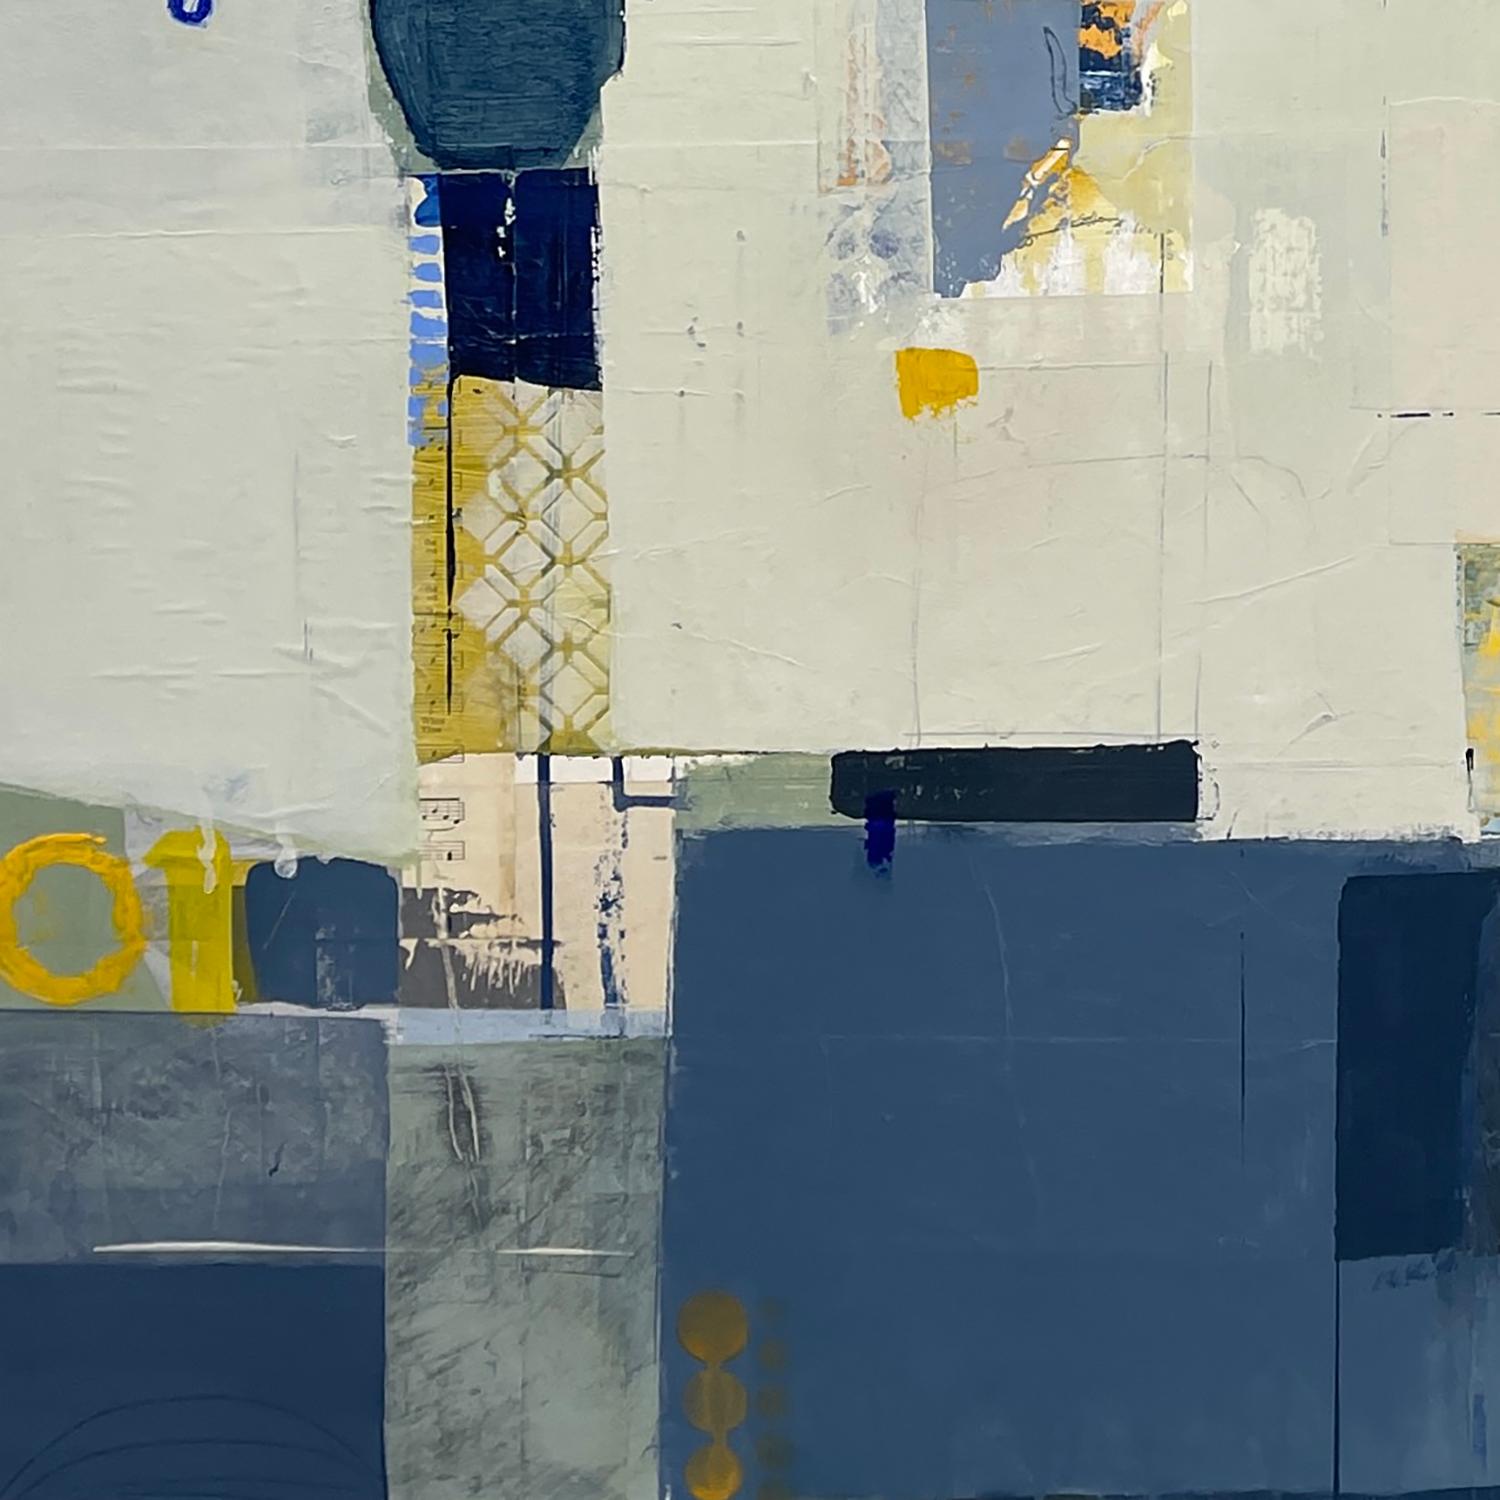 Deborah T Colter is a contemporary abstract painter who lives on the Island of Martha’s Vineyard.  Deborah graduated from the Rhode Island School of Design with a Bachelor Degree of Fine Arts in 1981. Deborah T Colter practices fearless trust in her